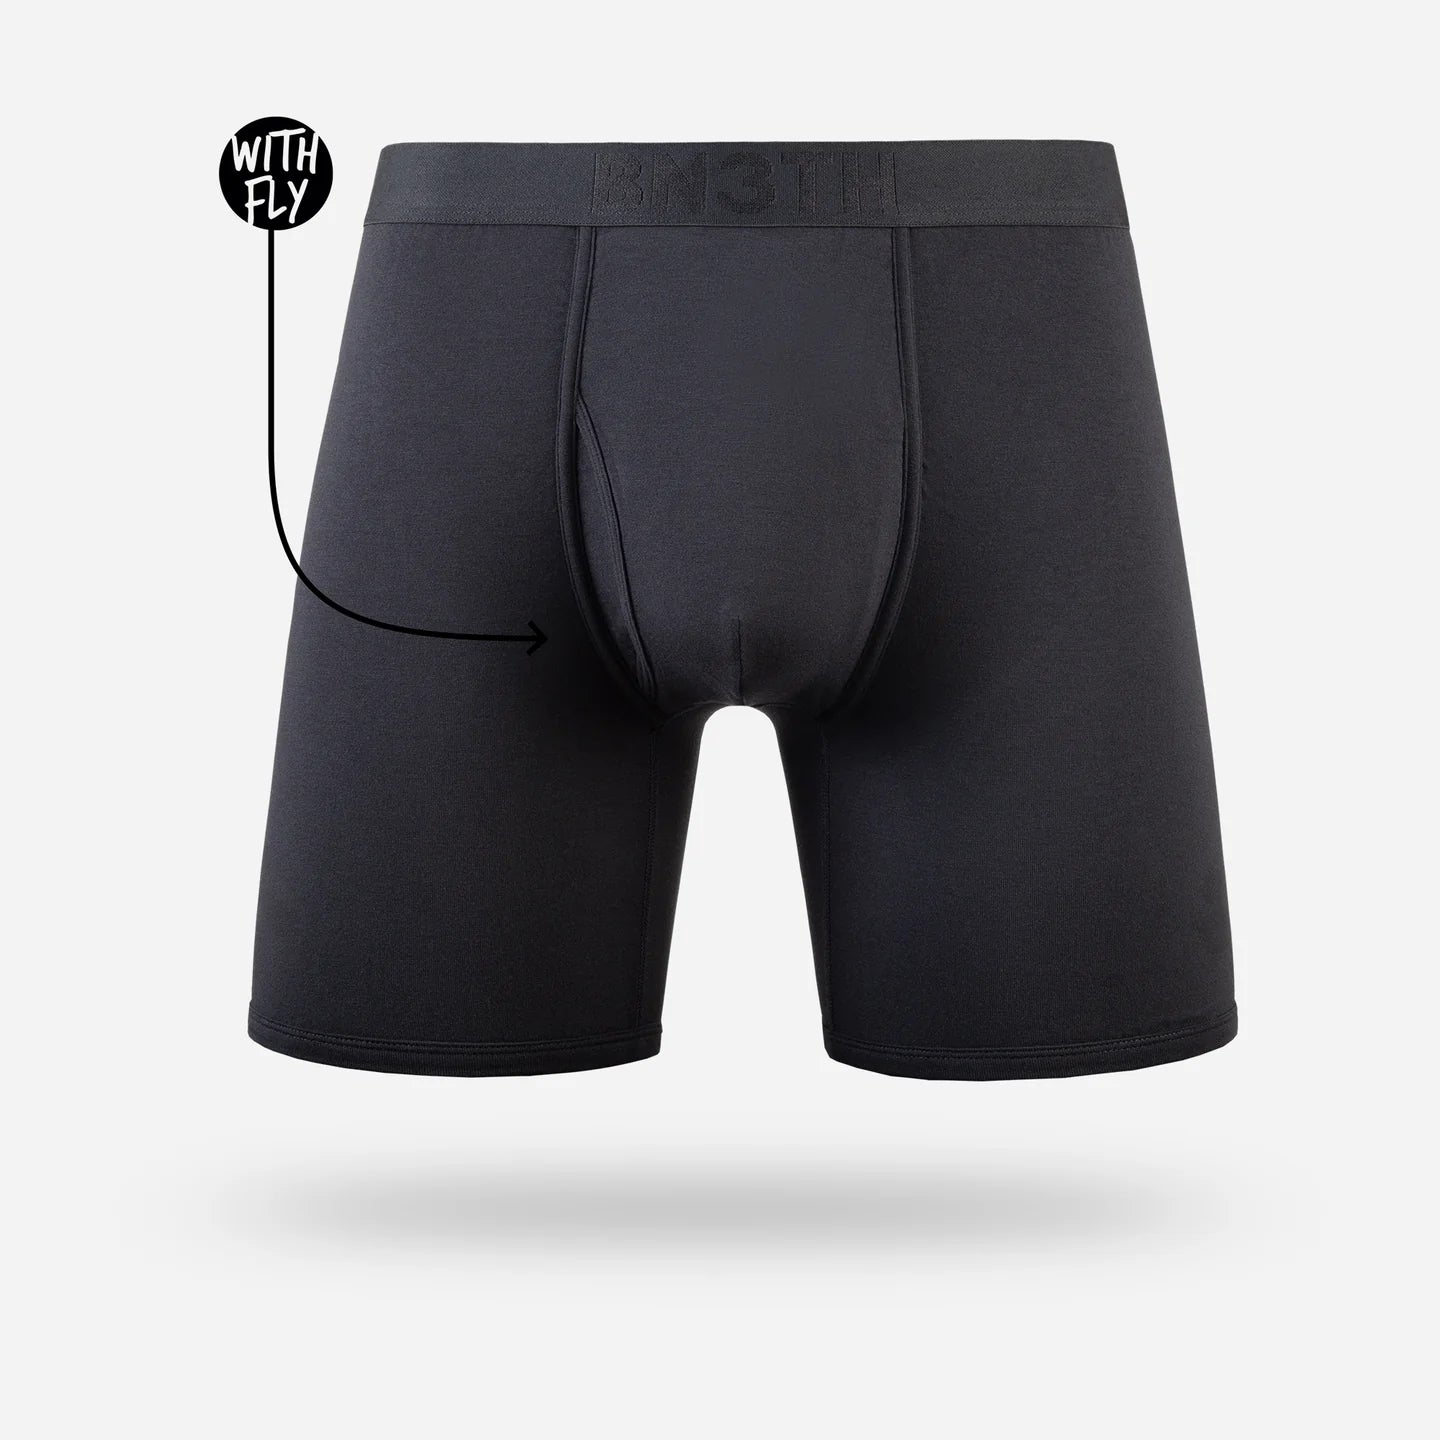 Bn3th - Cassic Boxer Brief w/ Fly : Black 